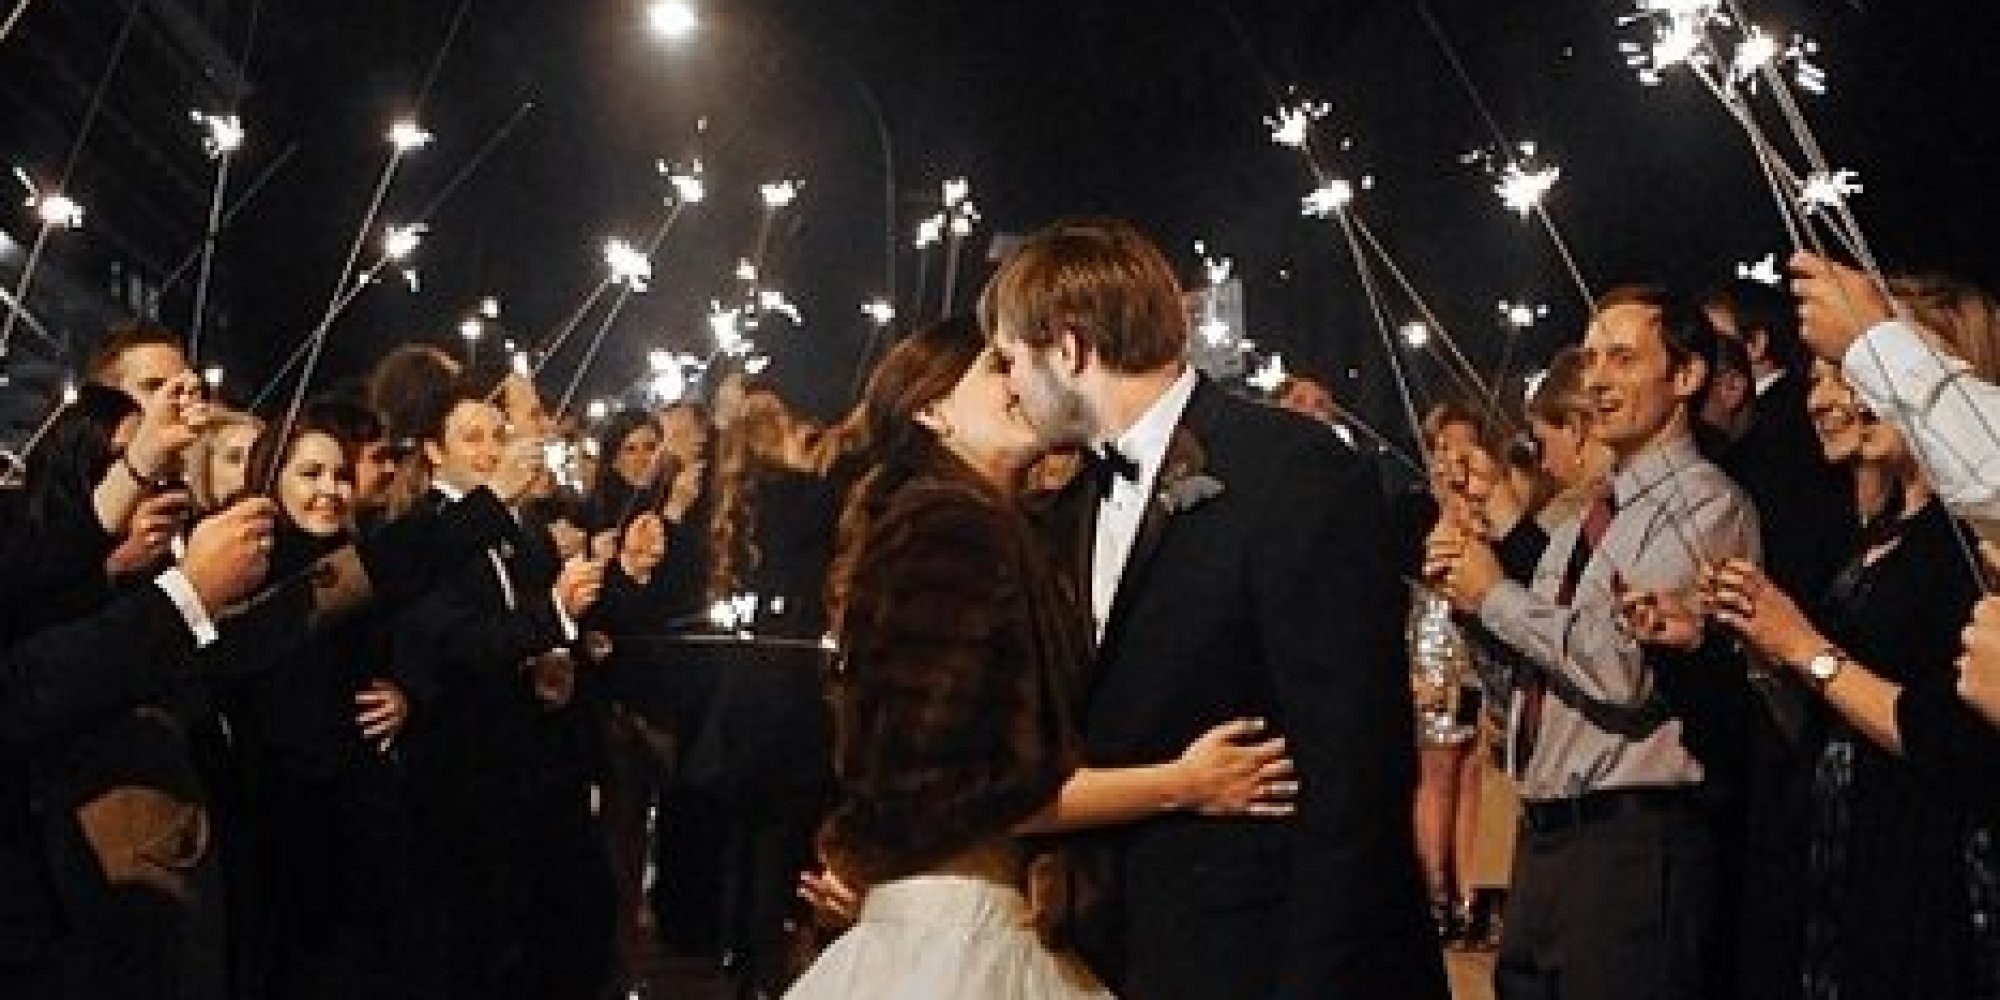 New Years Eve Party Guest 10 Reasons You Should Consider A New Year's Eve Wedding  The Huffington Post